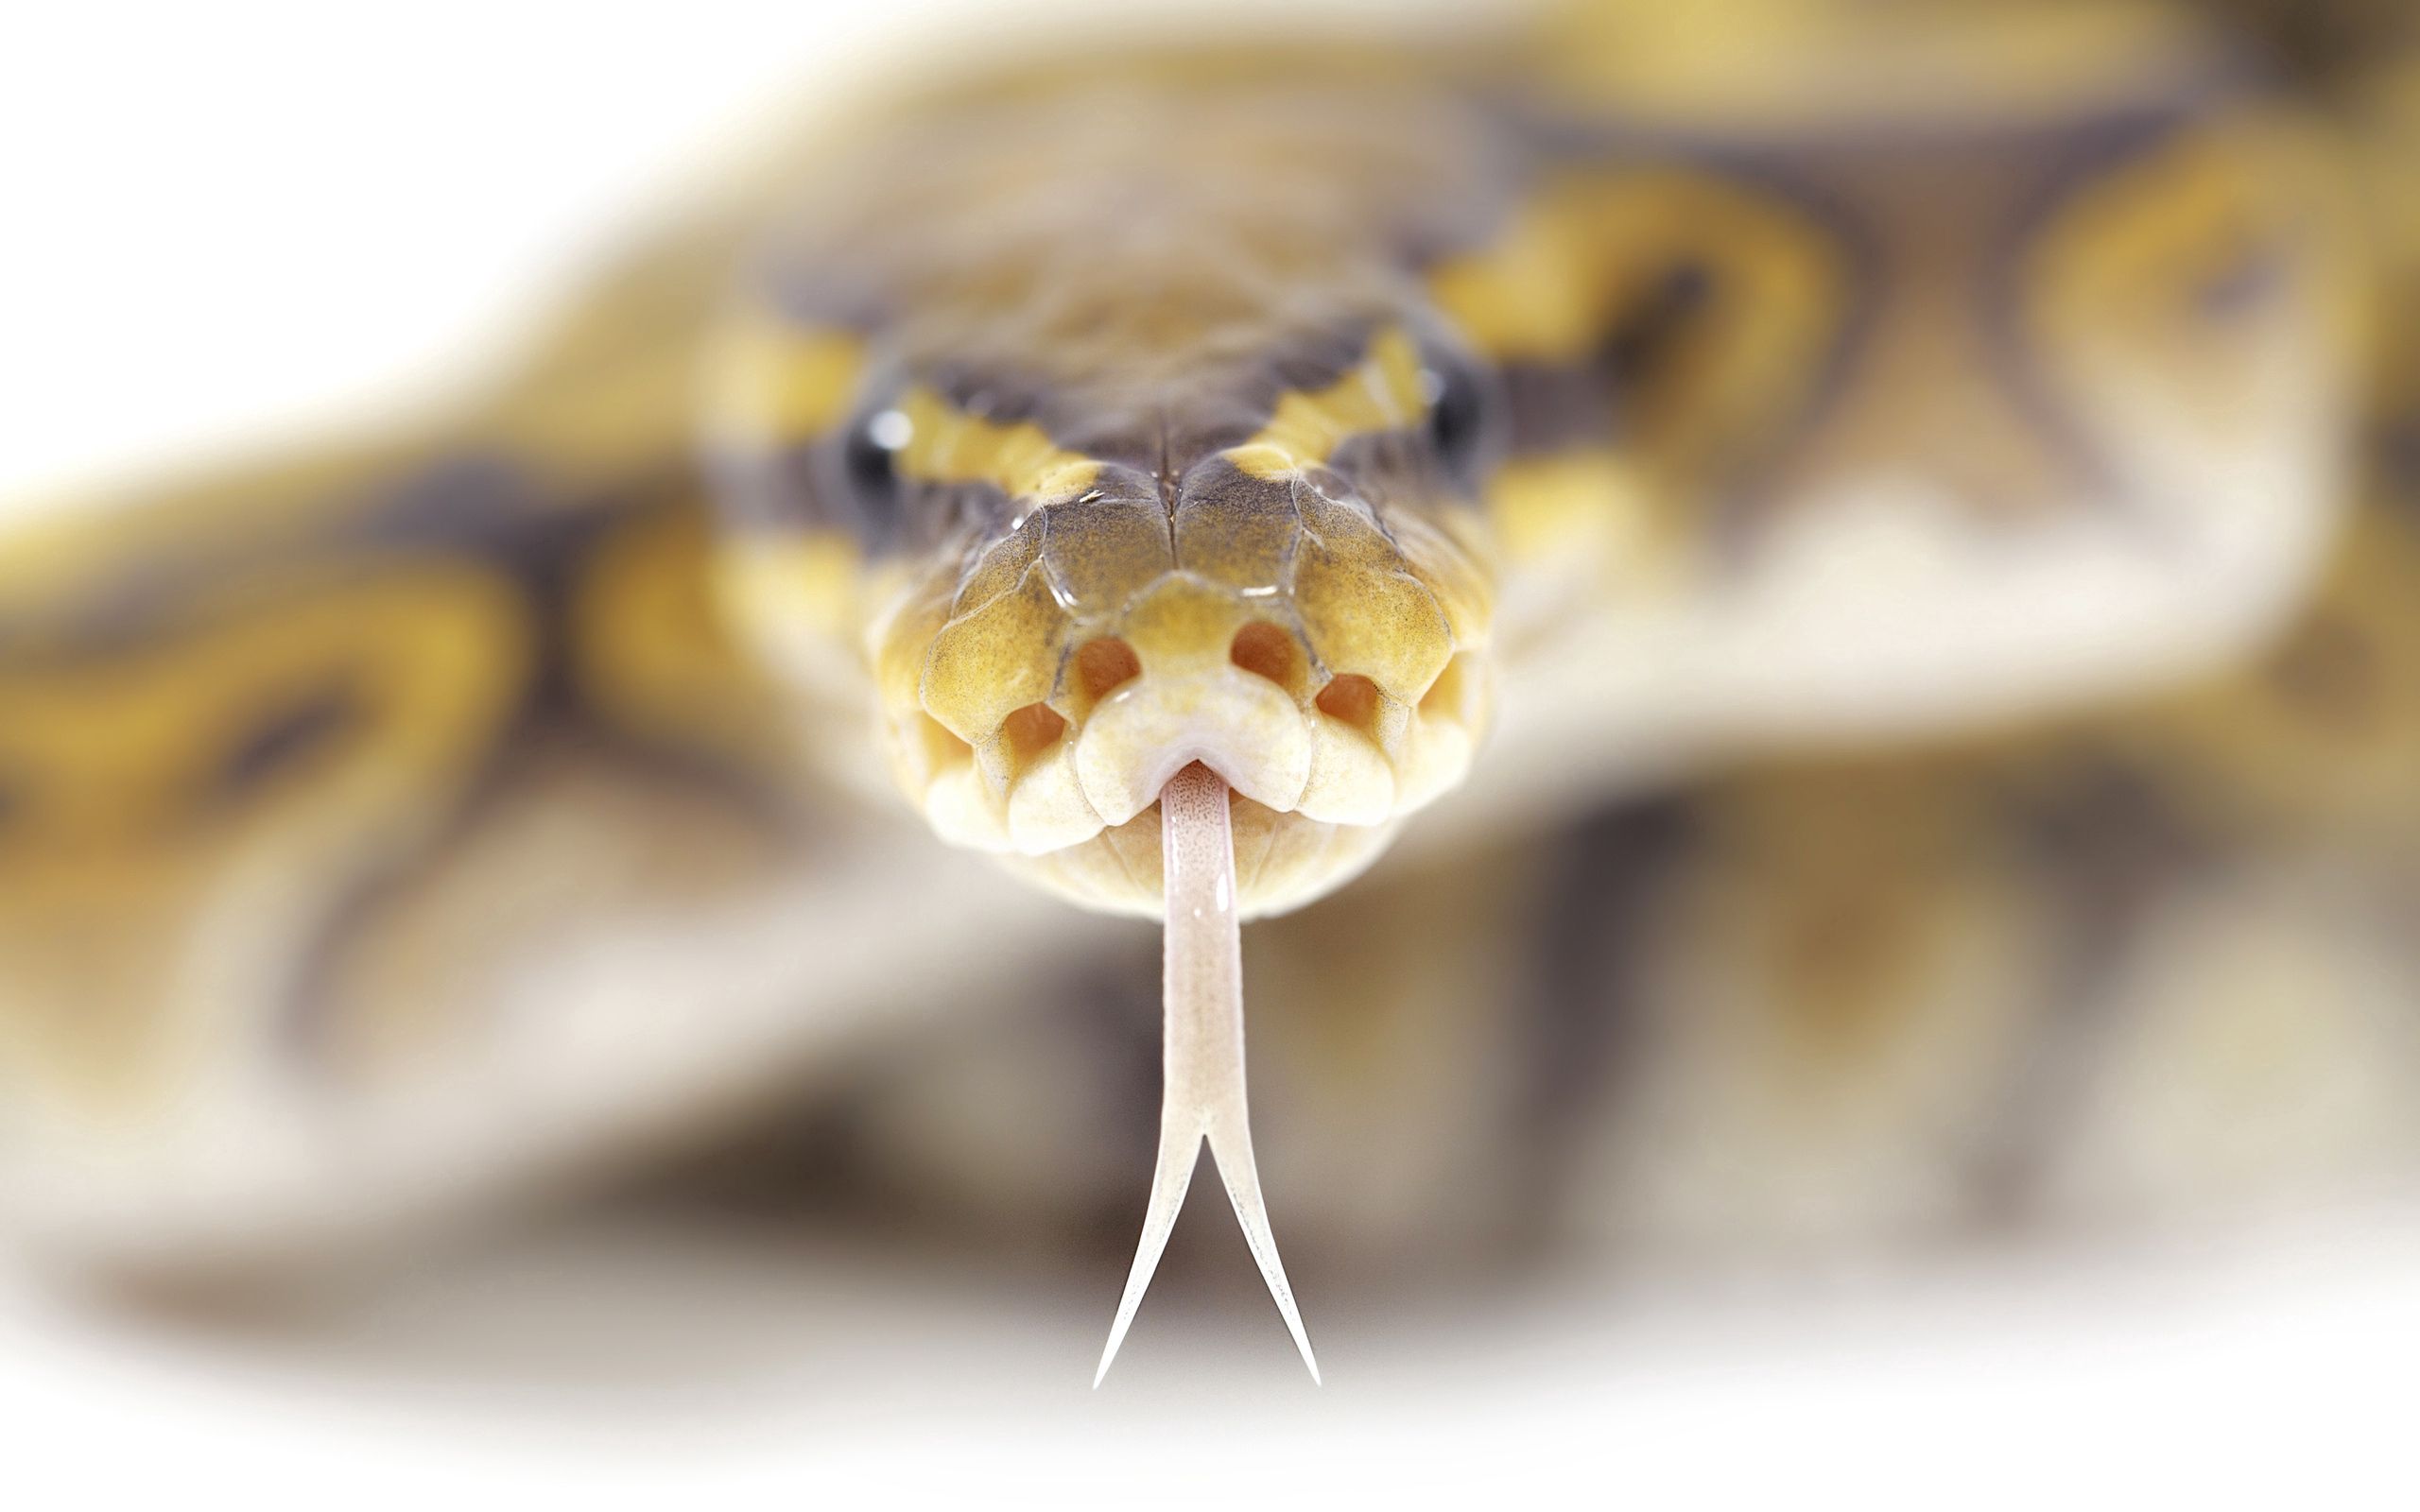 vertical wallpaper snake, animals, stains, spots, language, tongue, poison